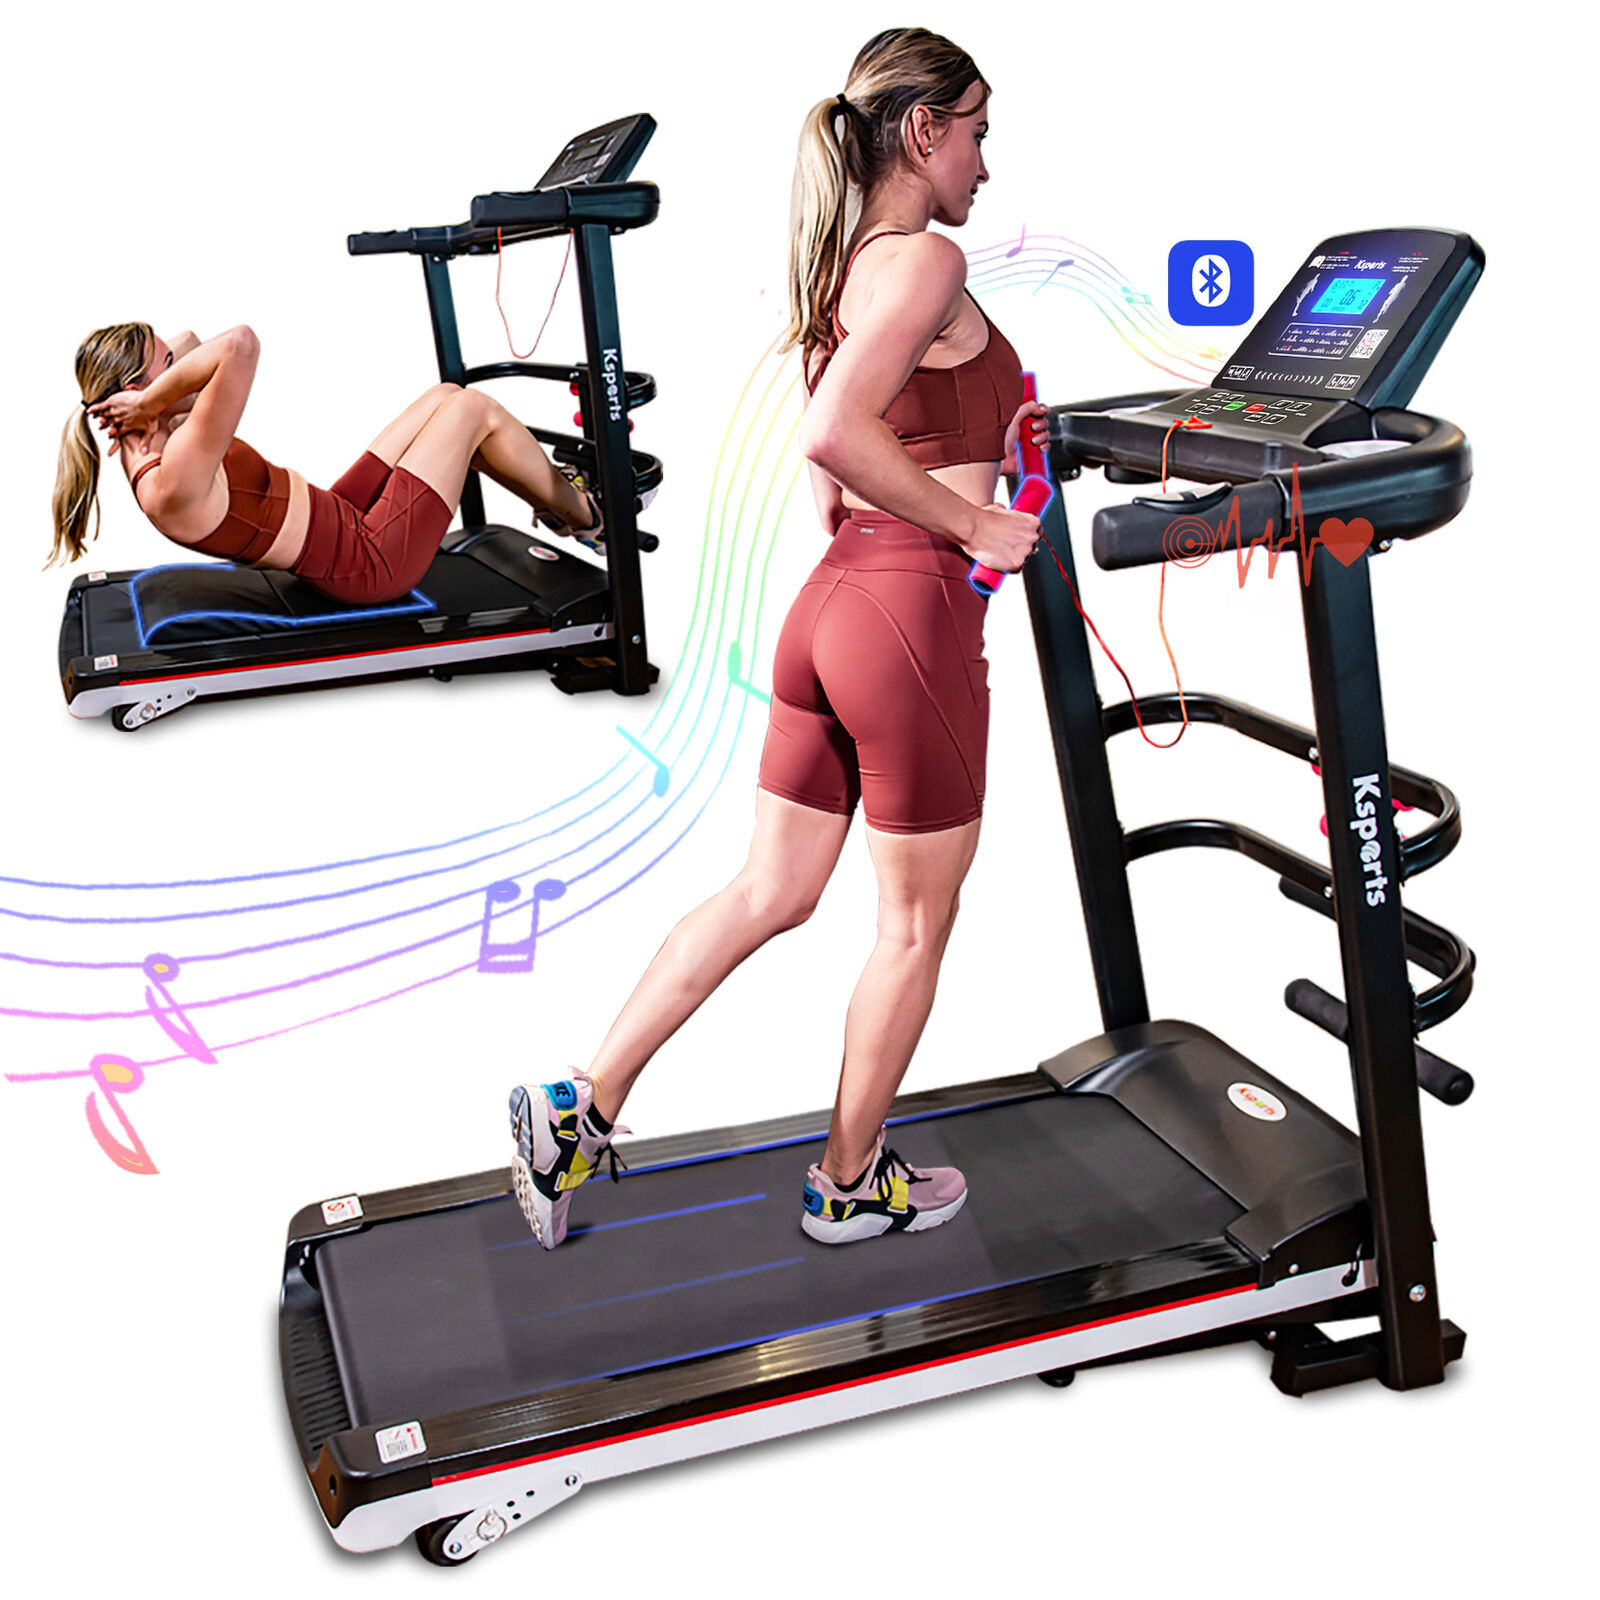 Ksports 16 Inch Wide Foldable Home Treadmill w/ Bluetooth & Fitness Tracking App